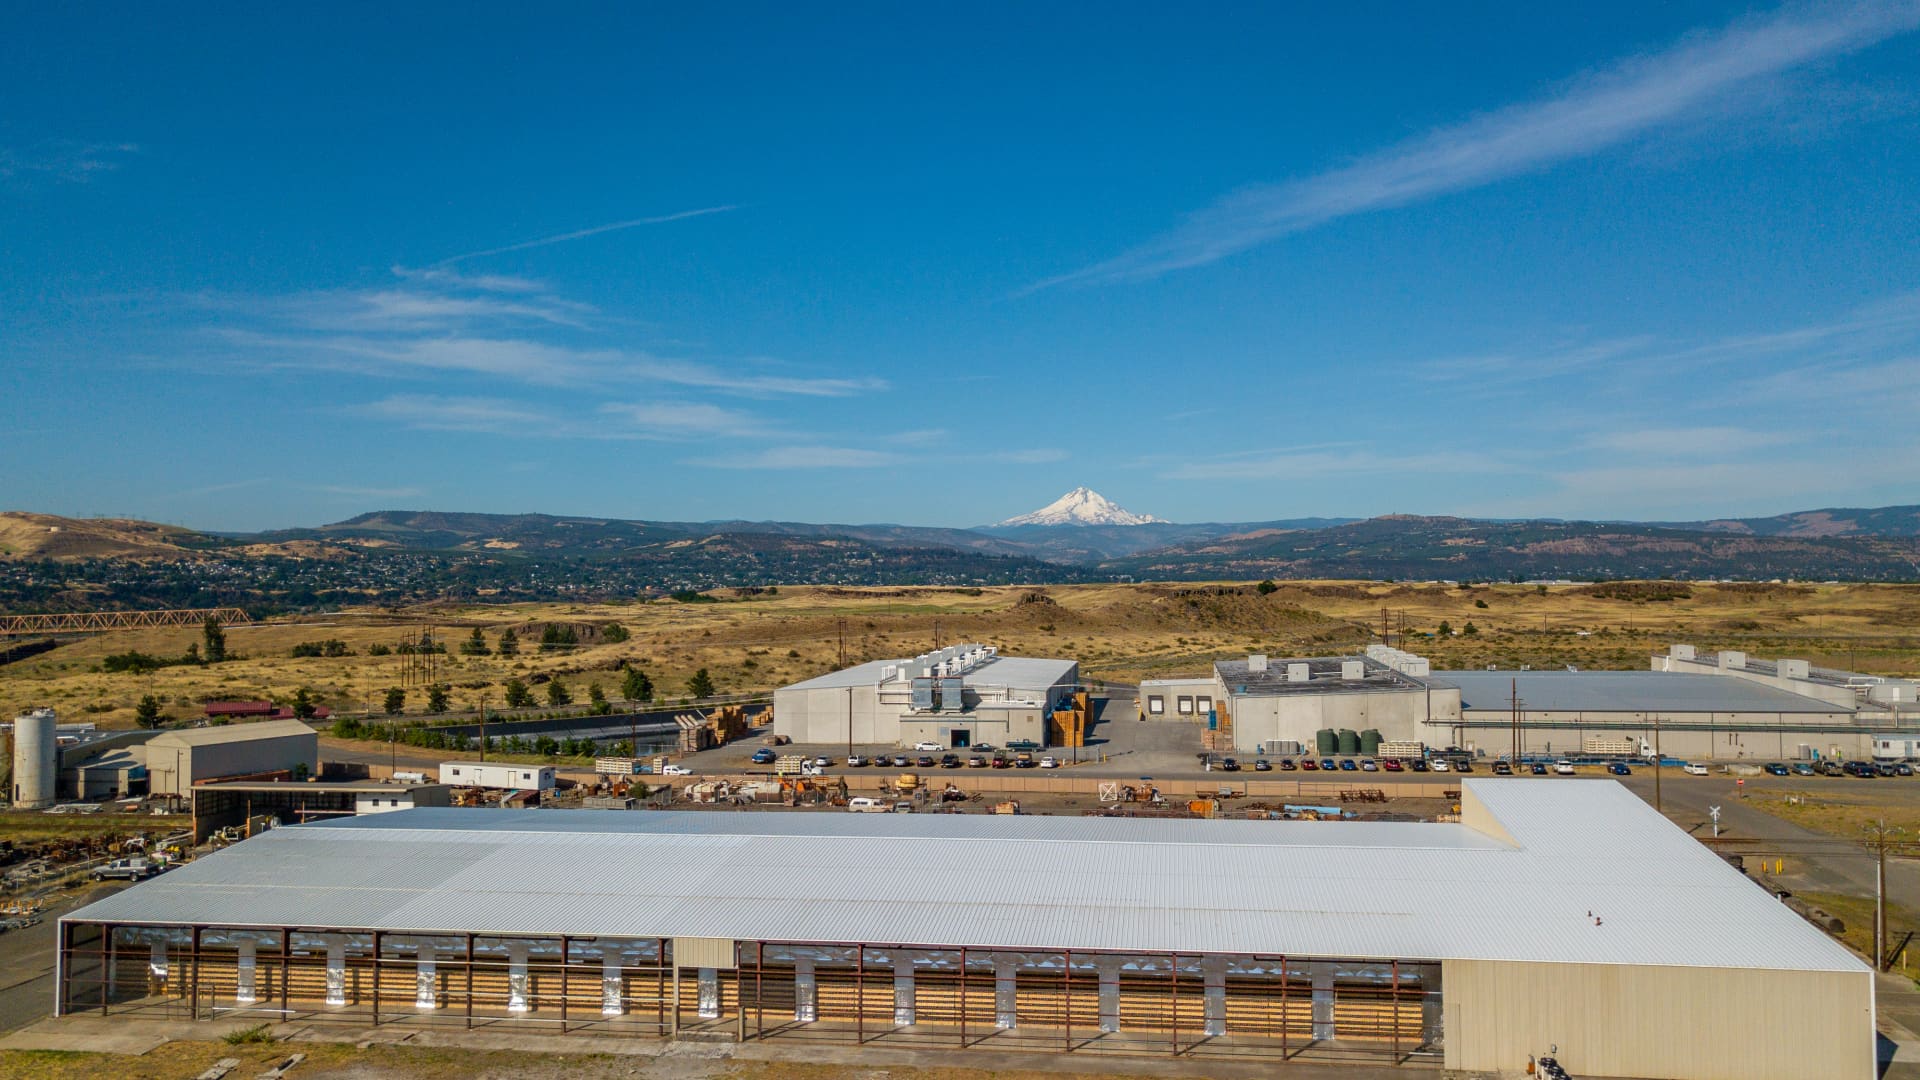 The SCATE Ventures mining farm is in Dallesport, Washington.